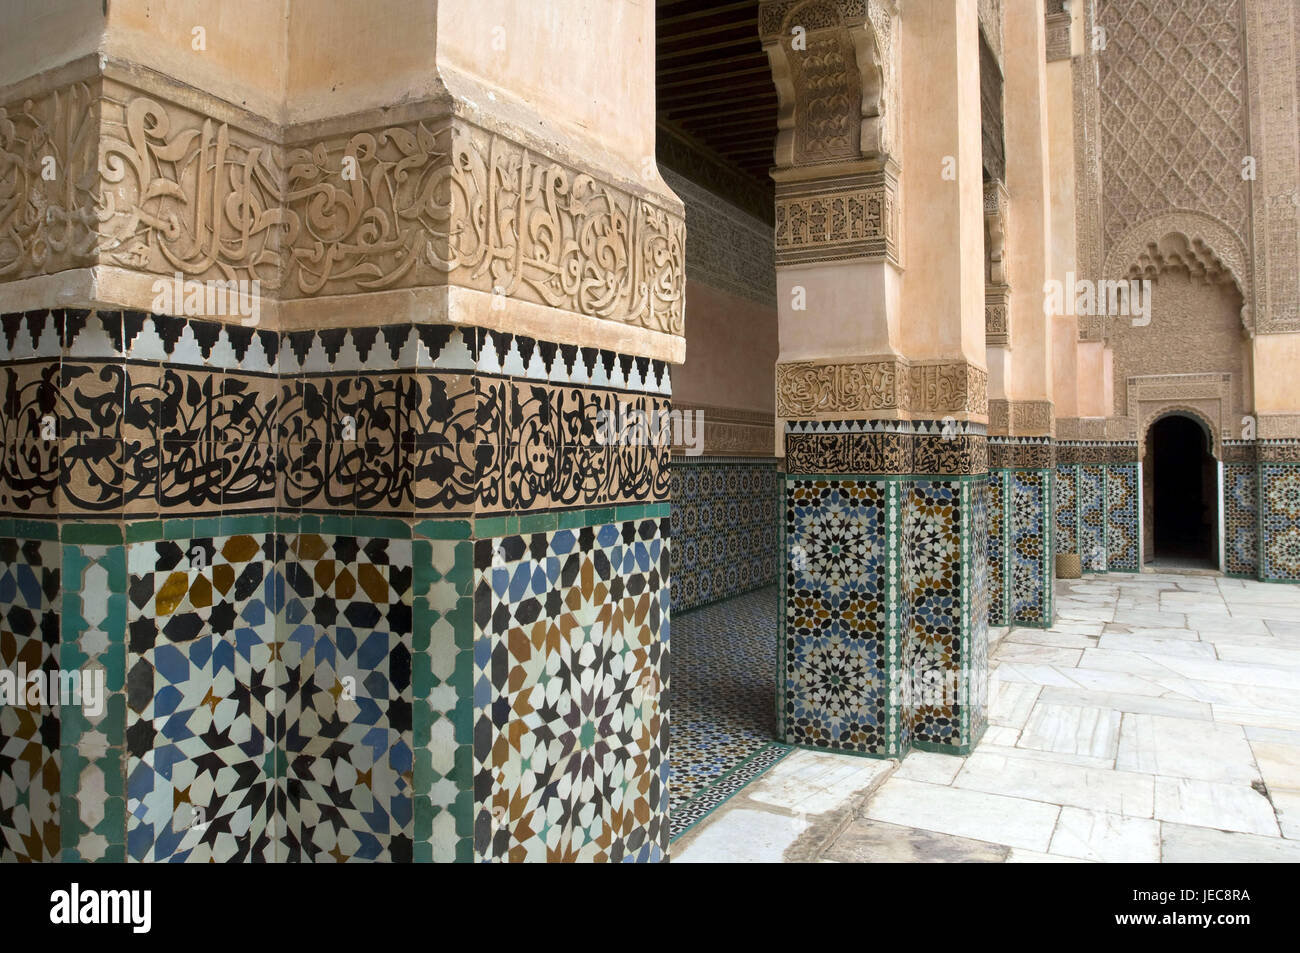 Morocco, Marrakech, madrassa, Ali ben Youssef Medersa, atrium, detail, Africa, North Africa, destination, town, Old Town, place of interest, building, structure, historically, architecture, architectural style, court, inner courtyard, faïence mosaics, tiles, samples, ornaments, faïence, faïence flowing, outside, deserted, basin, skilfully, Stock Photo